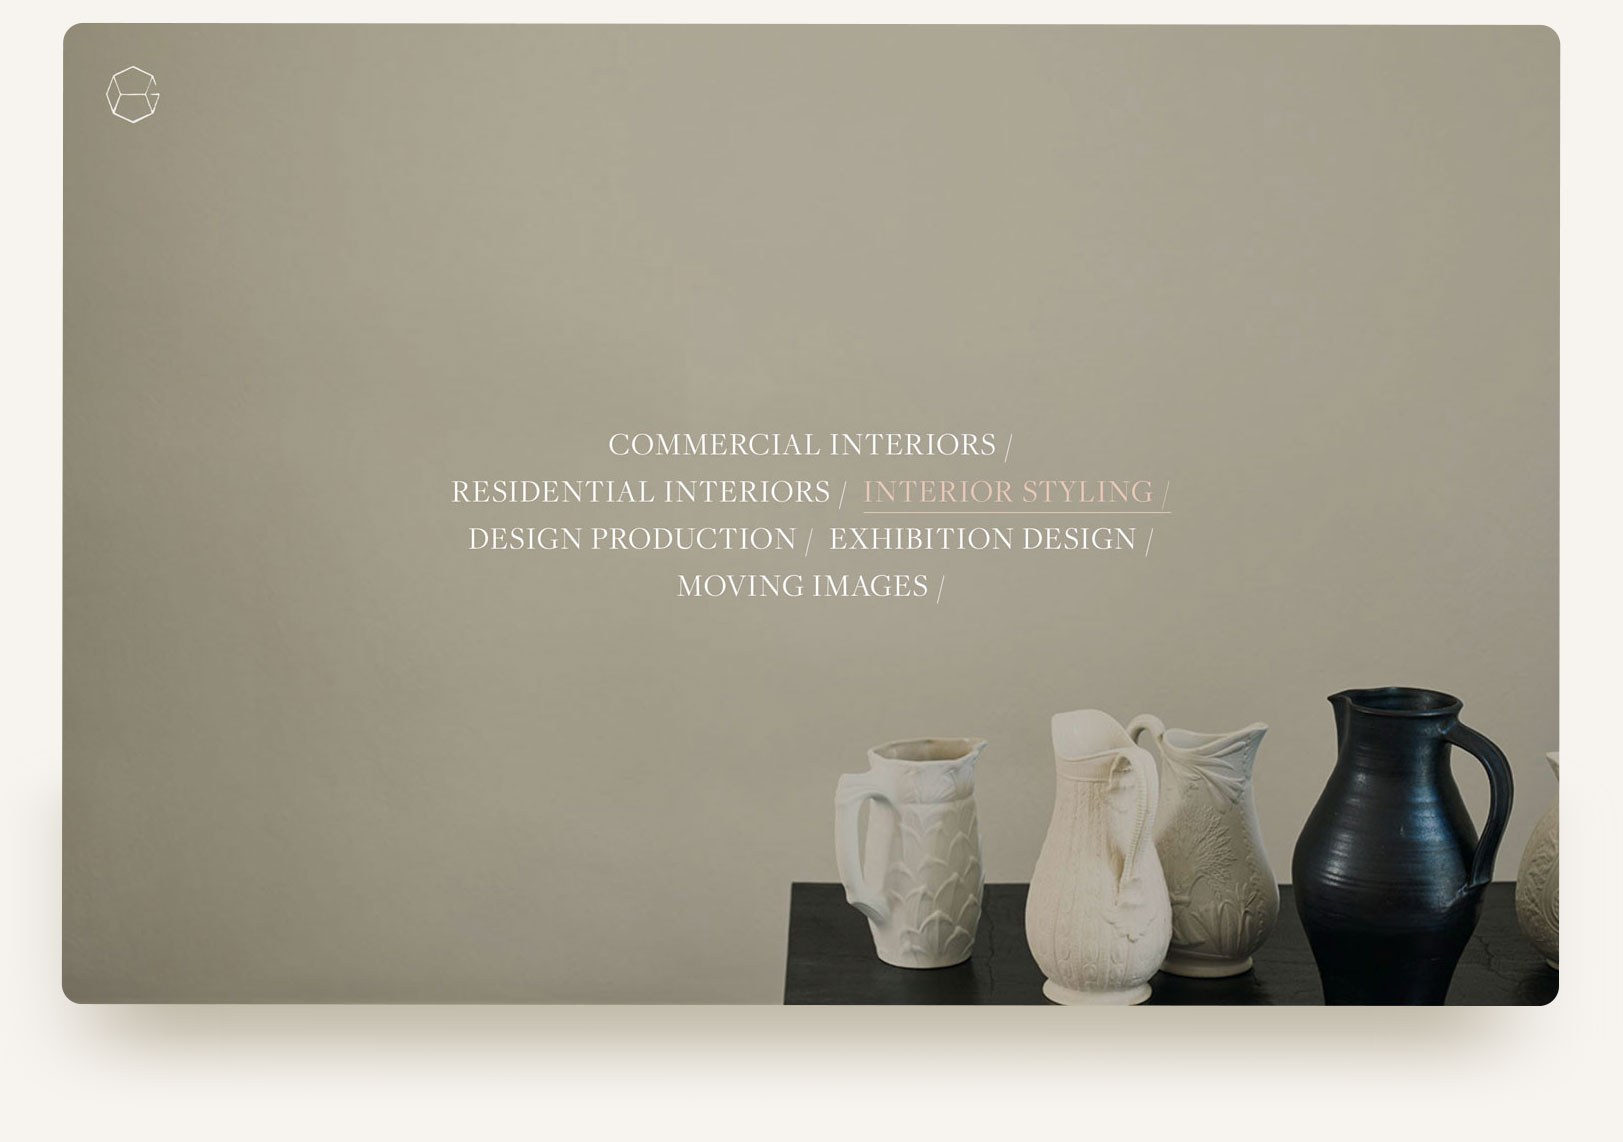 House of Grey interior designer stylist studio portfolio homepage gallery carousel with typography rollover. Squarespace website design and custom code by Brittany Hurdle beckon webeckon